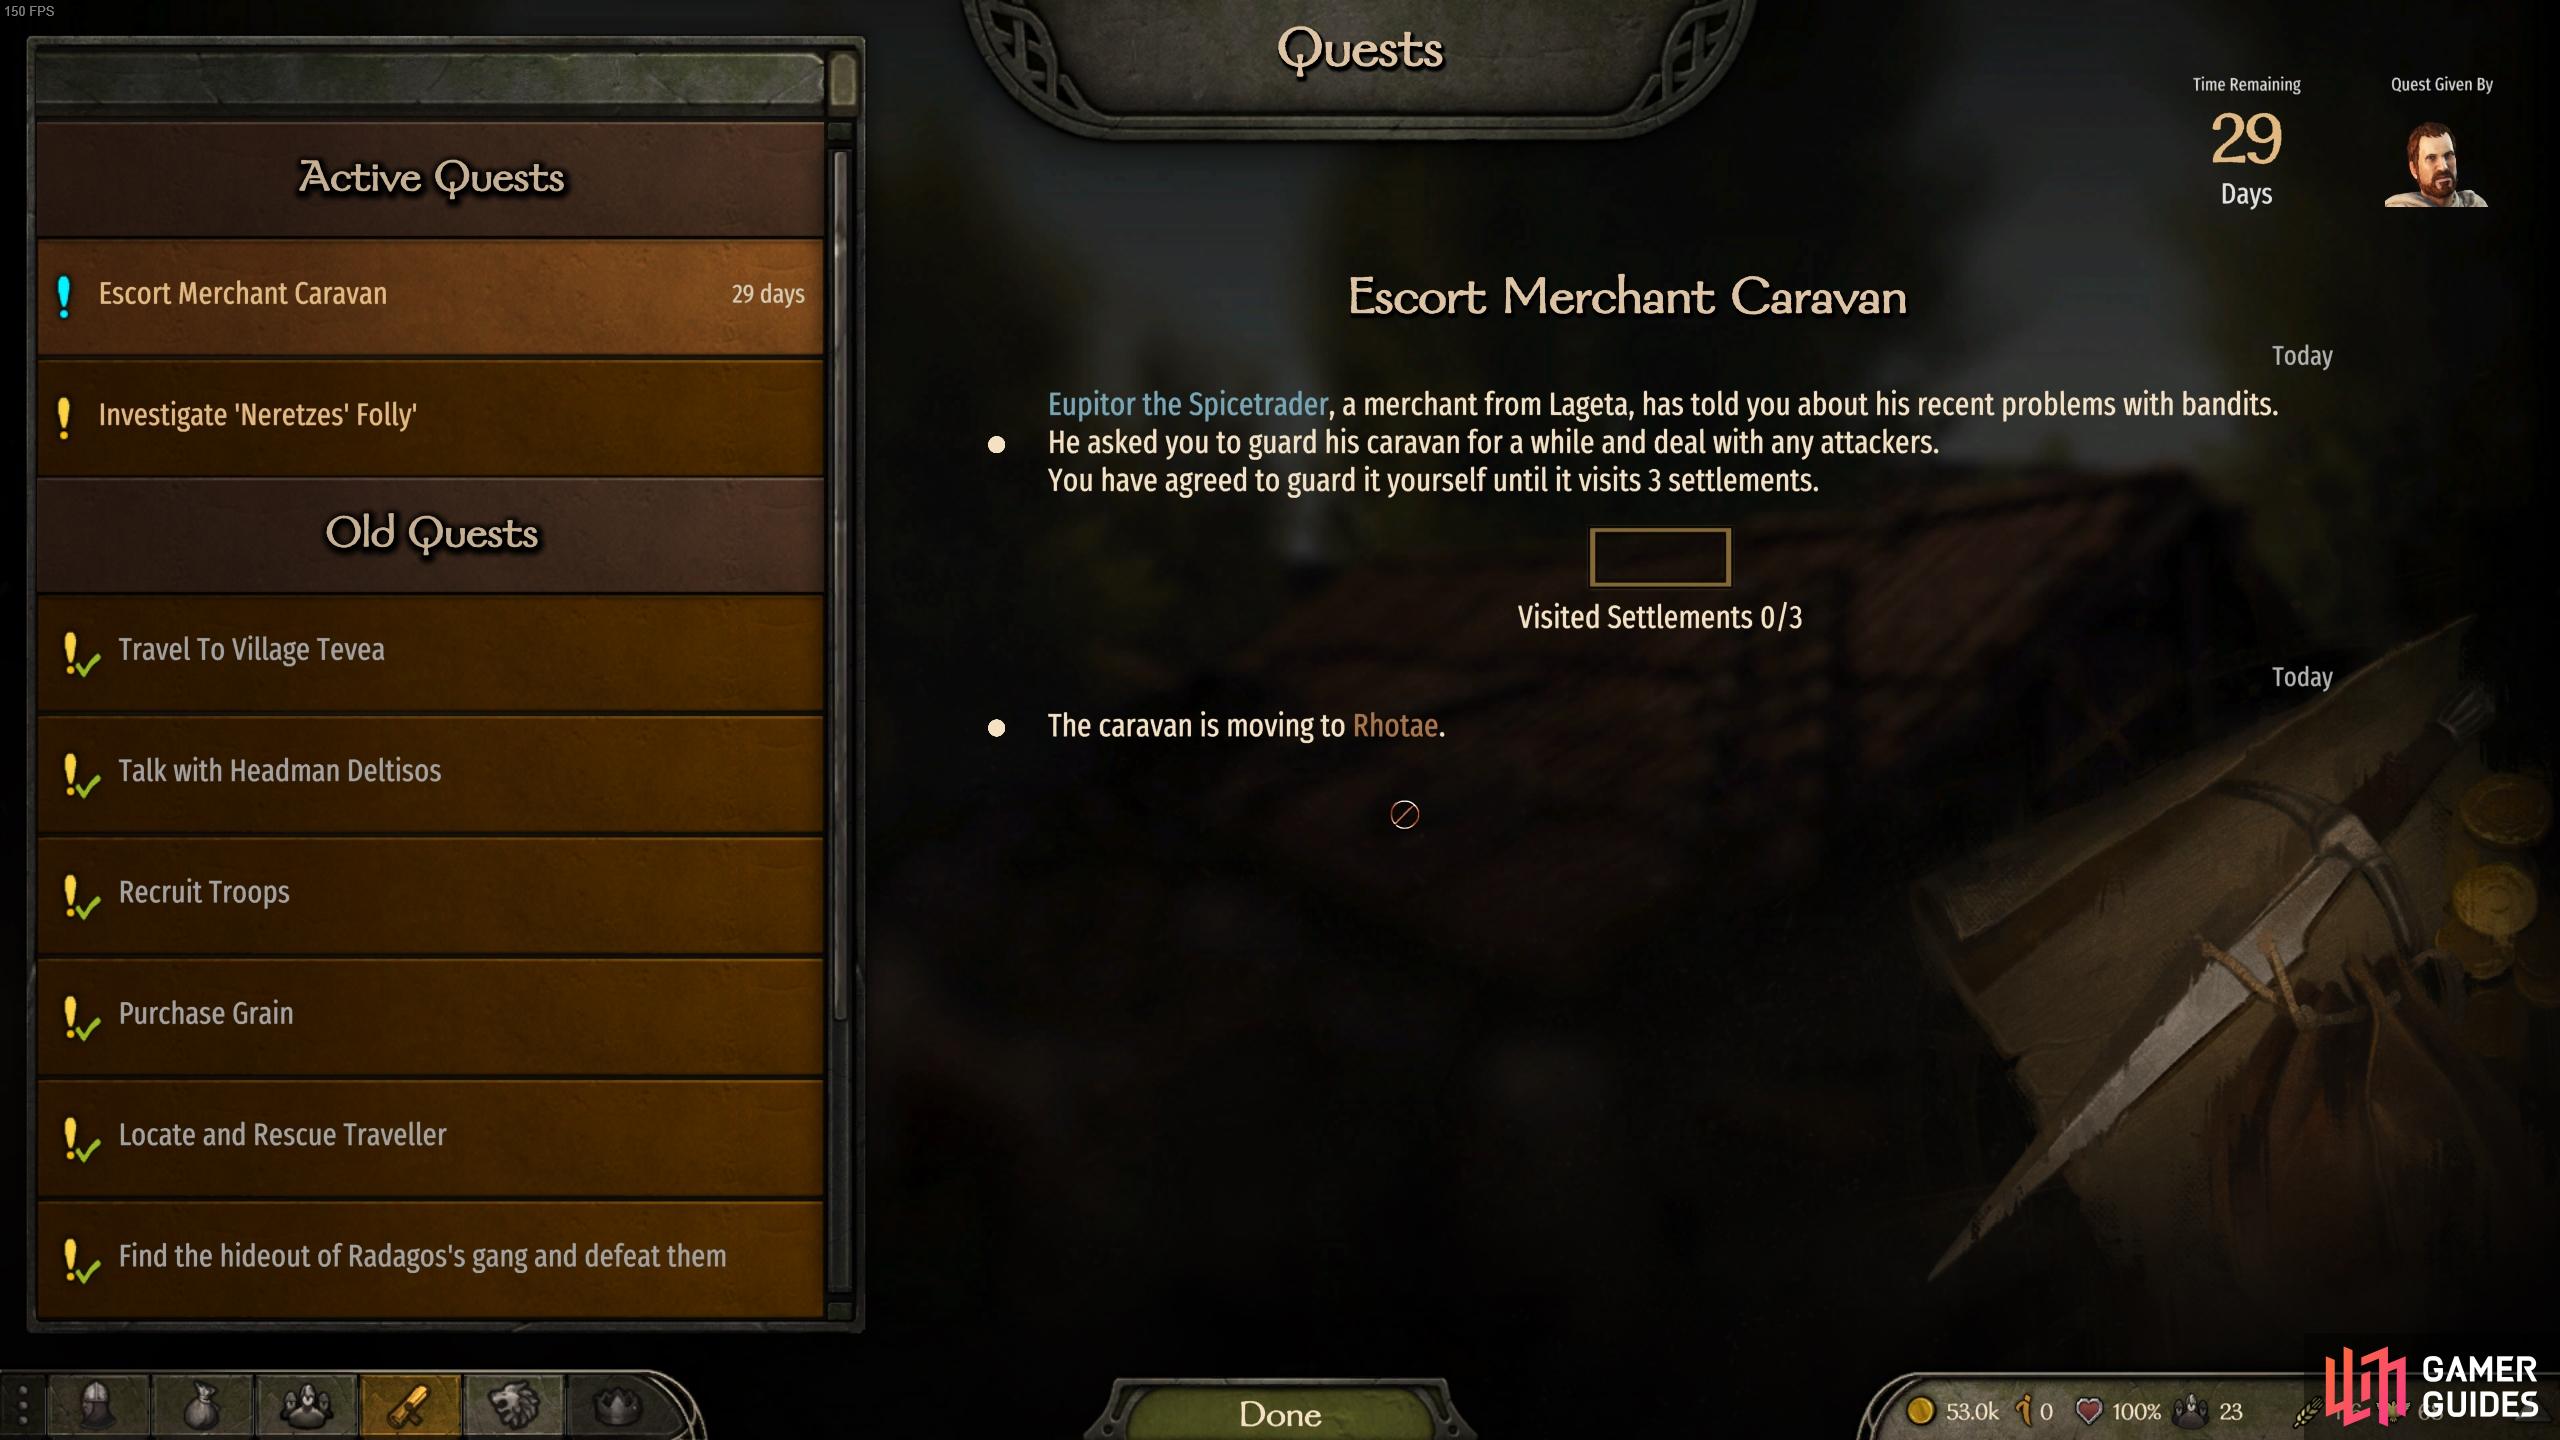 You can track the details and progress of the quest once accepted from the merchant.